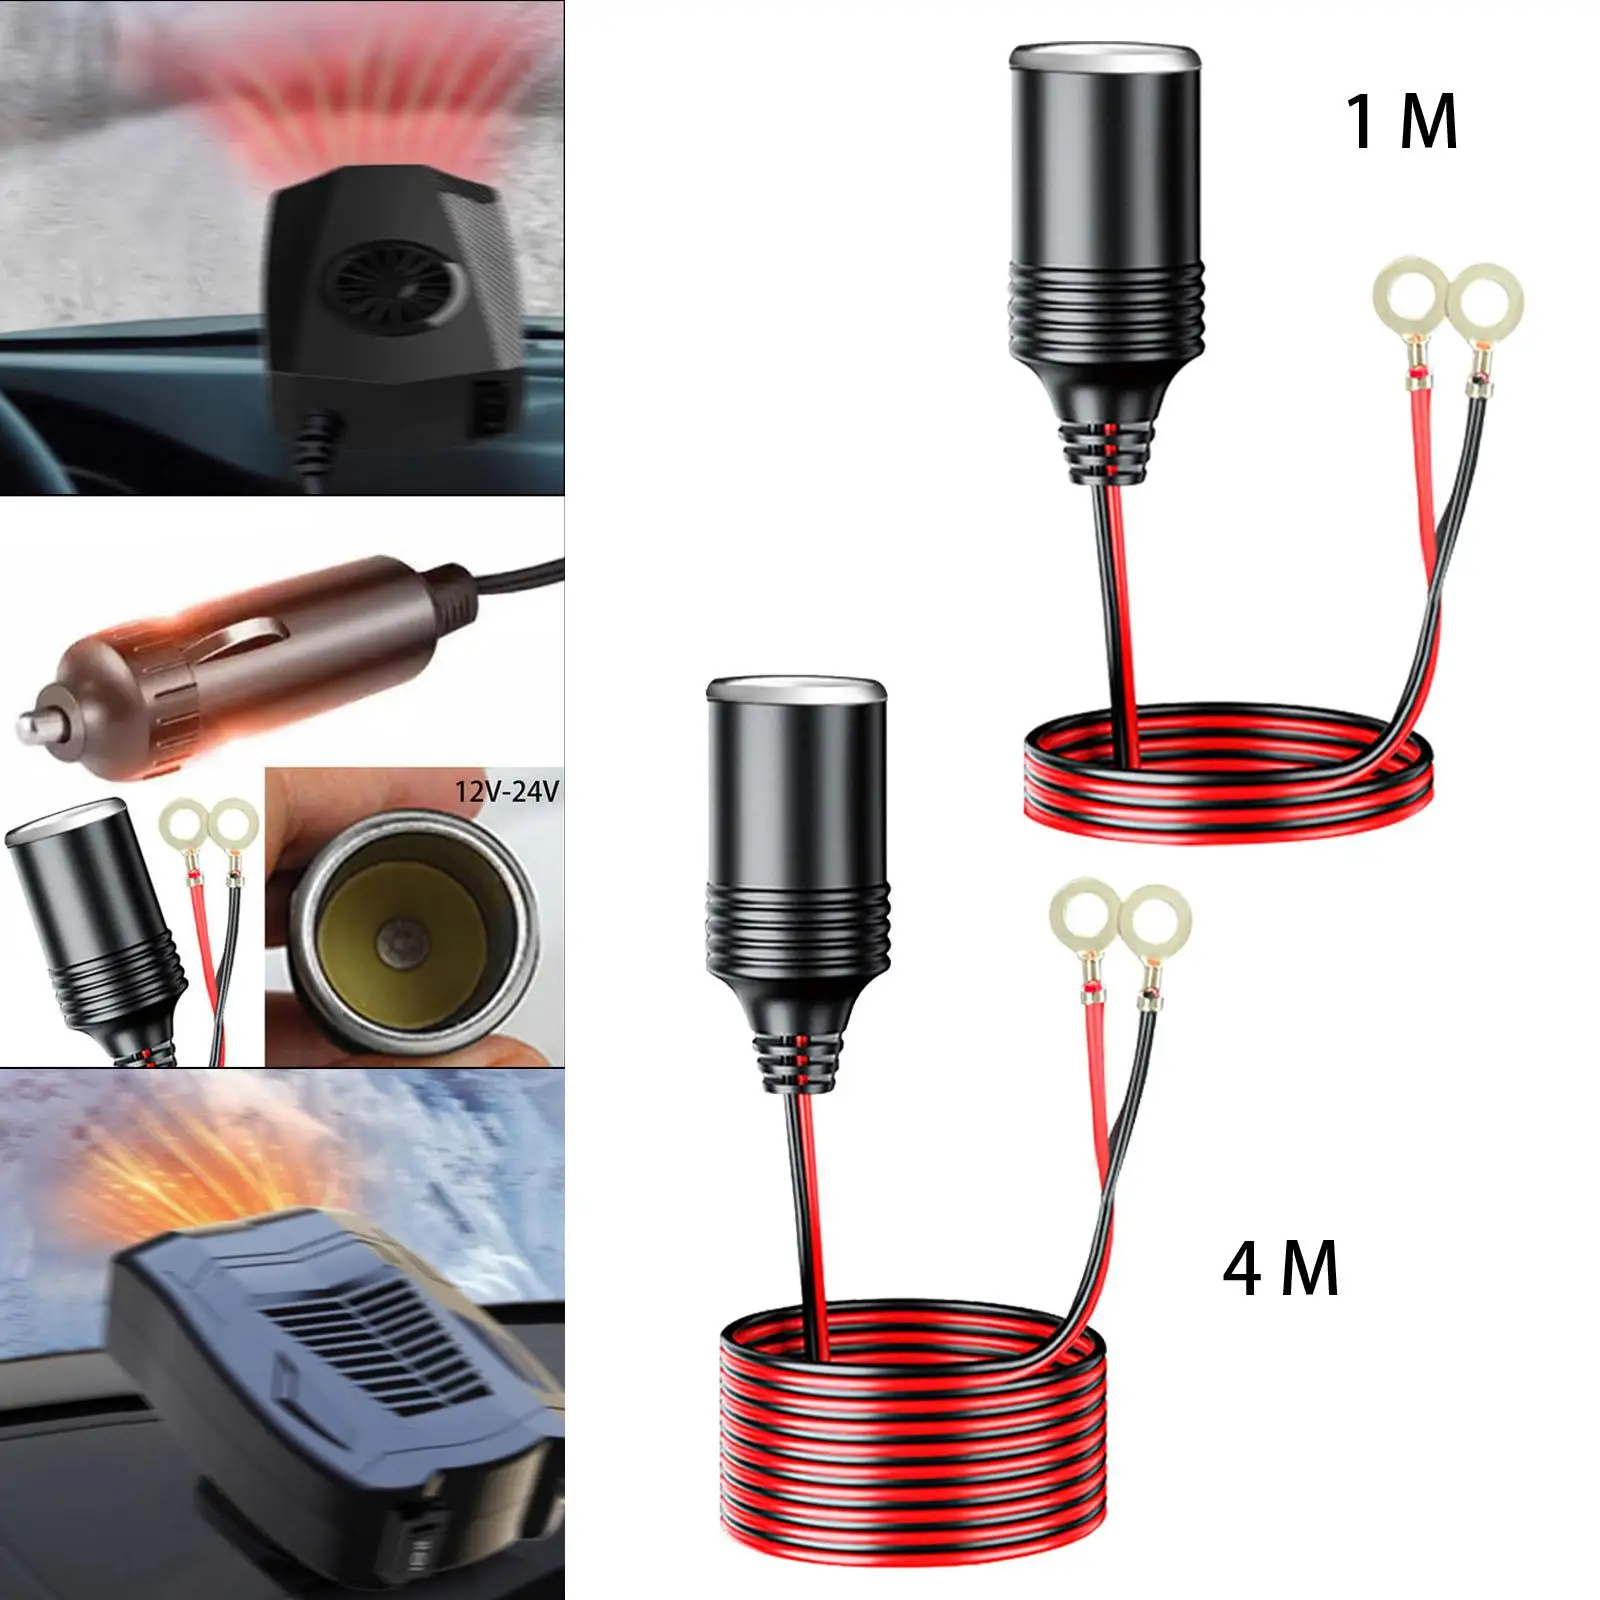 Cigarette Lighter Adapter Power Supply Cord Accessories Replaces Female Plug